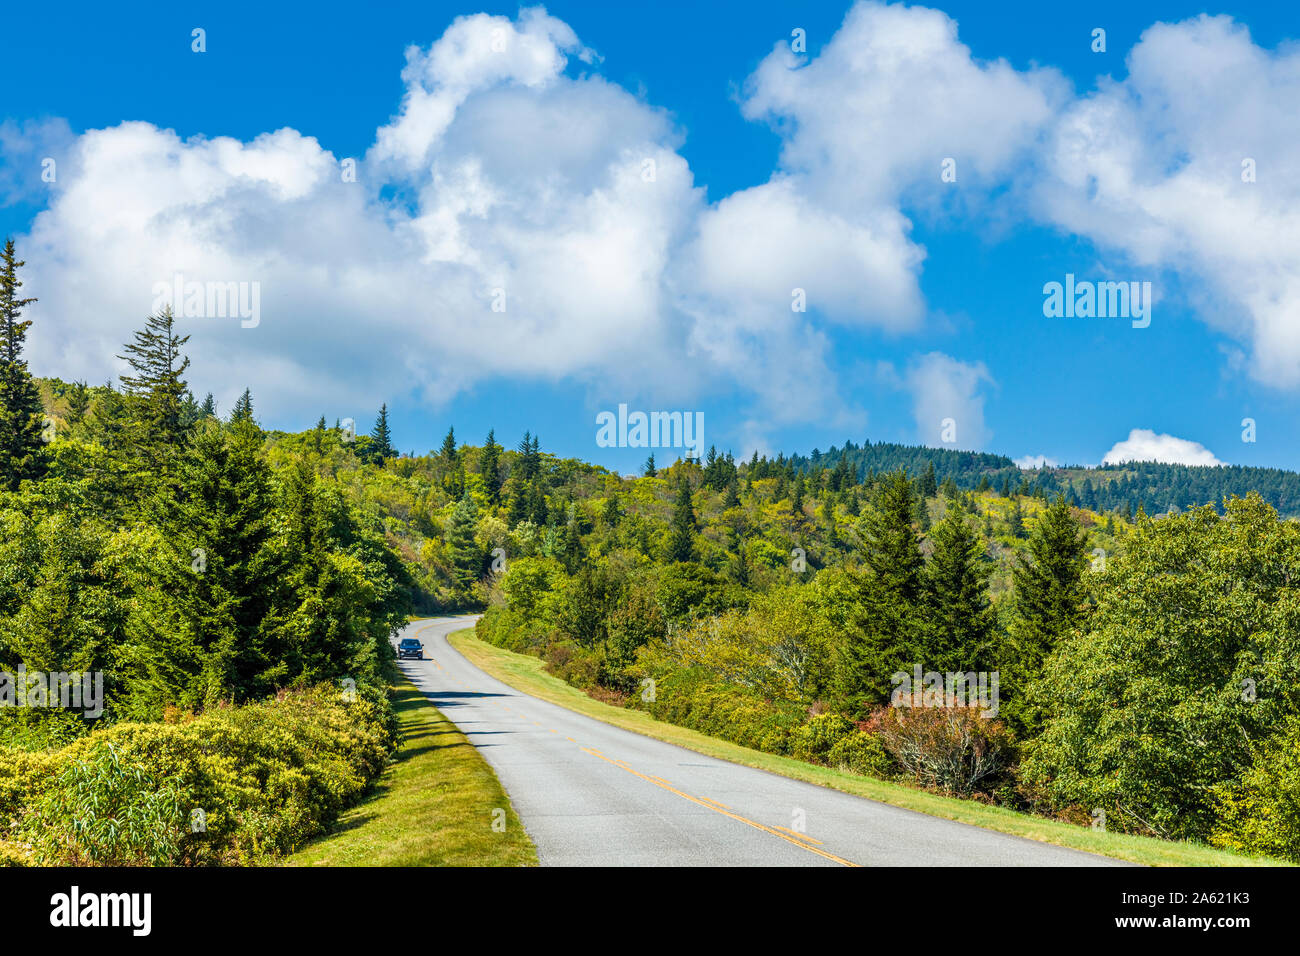 Blue Ridge Parkway in the Smoky Mountains of North Carolina in the Unted States Stock Photo